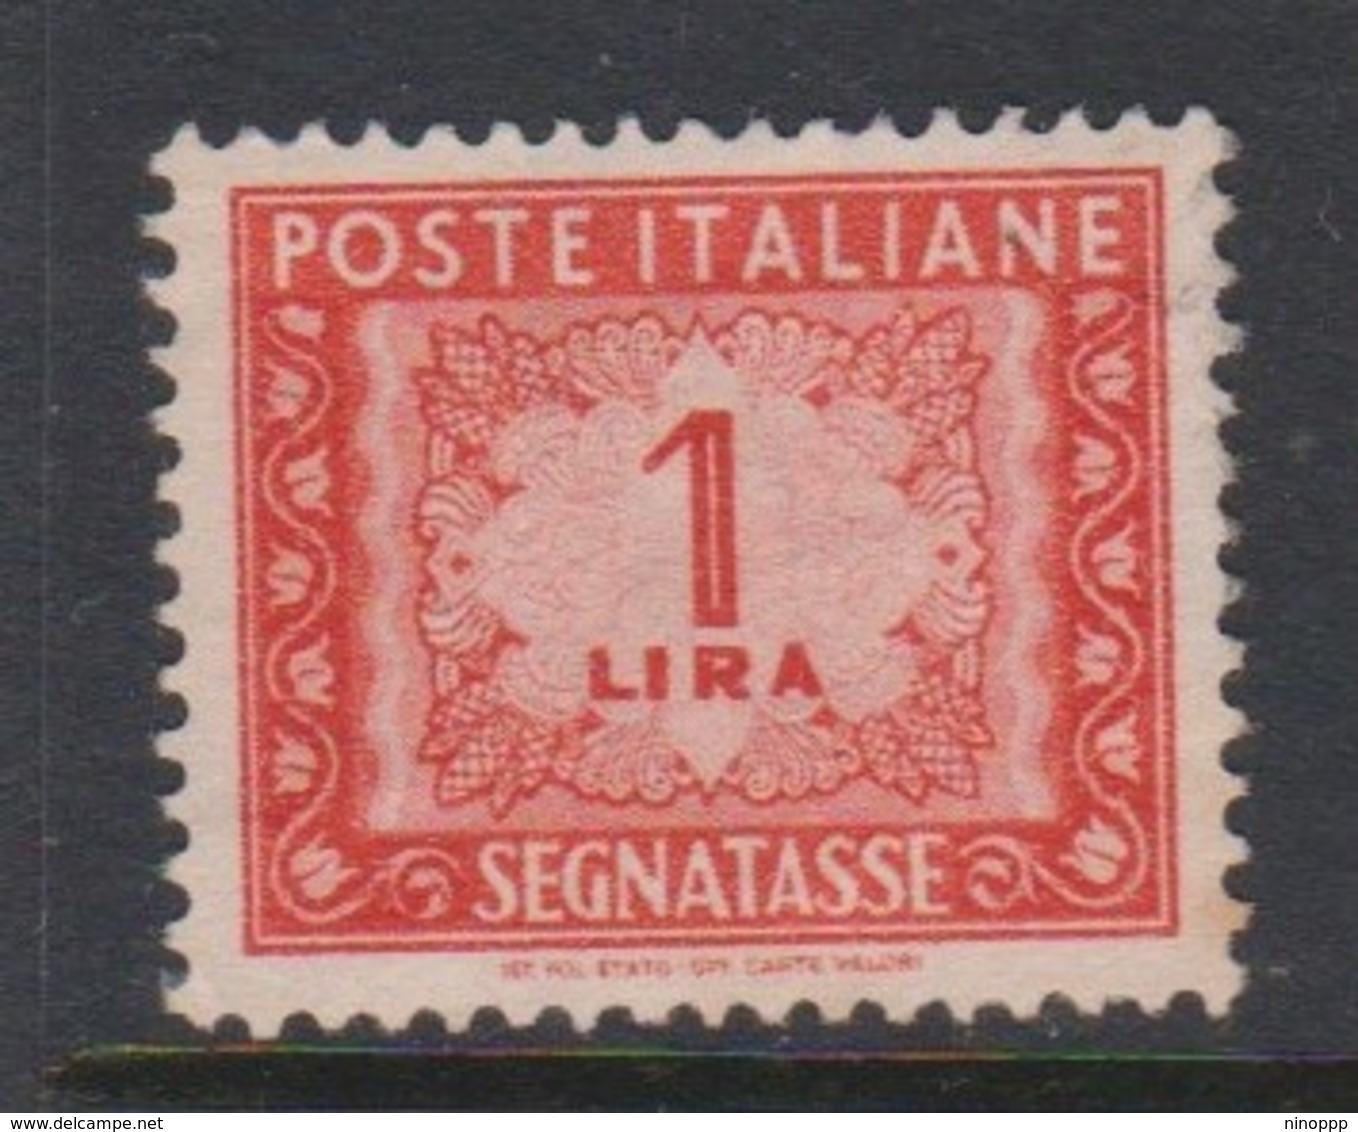 Italy PD 97 1947-54 Republic  Postage Due,watermark Flying Wheel,lire 1,used - Postage Due